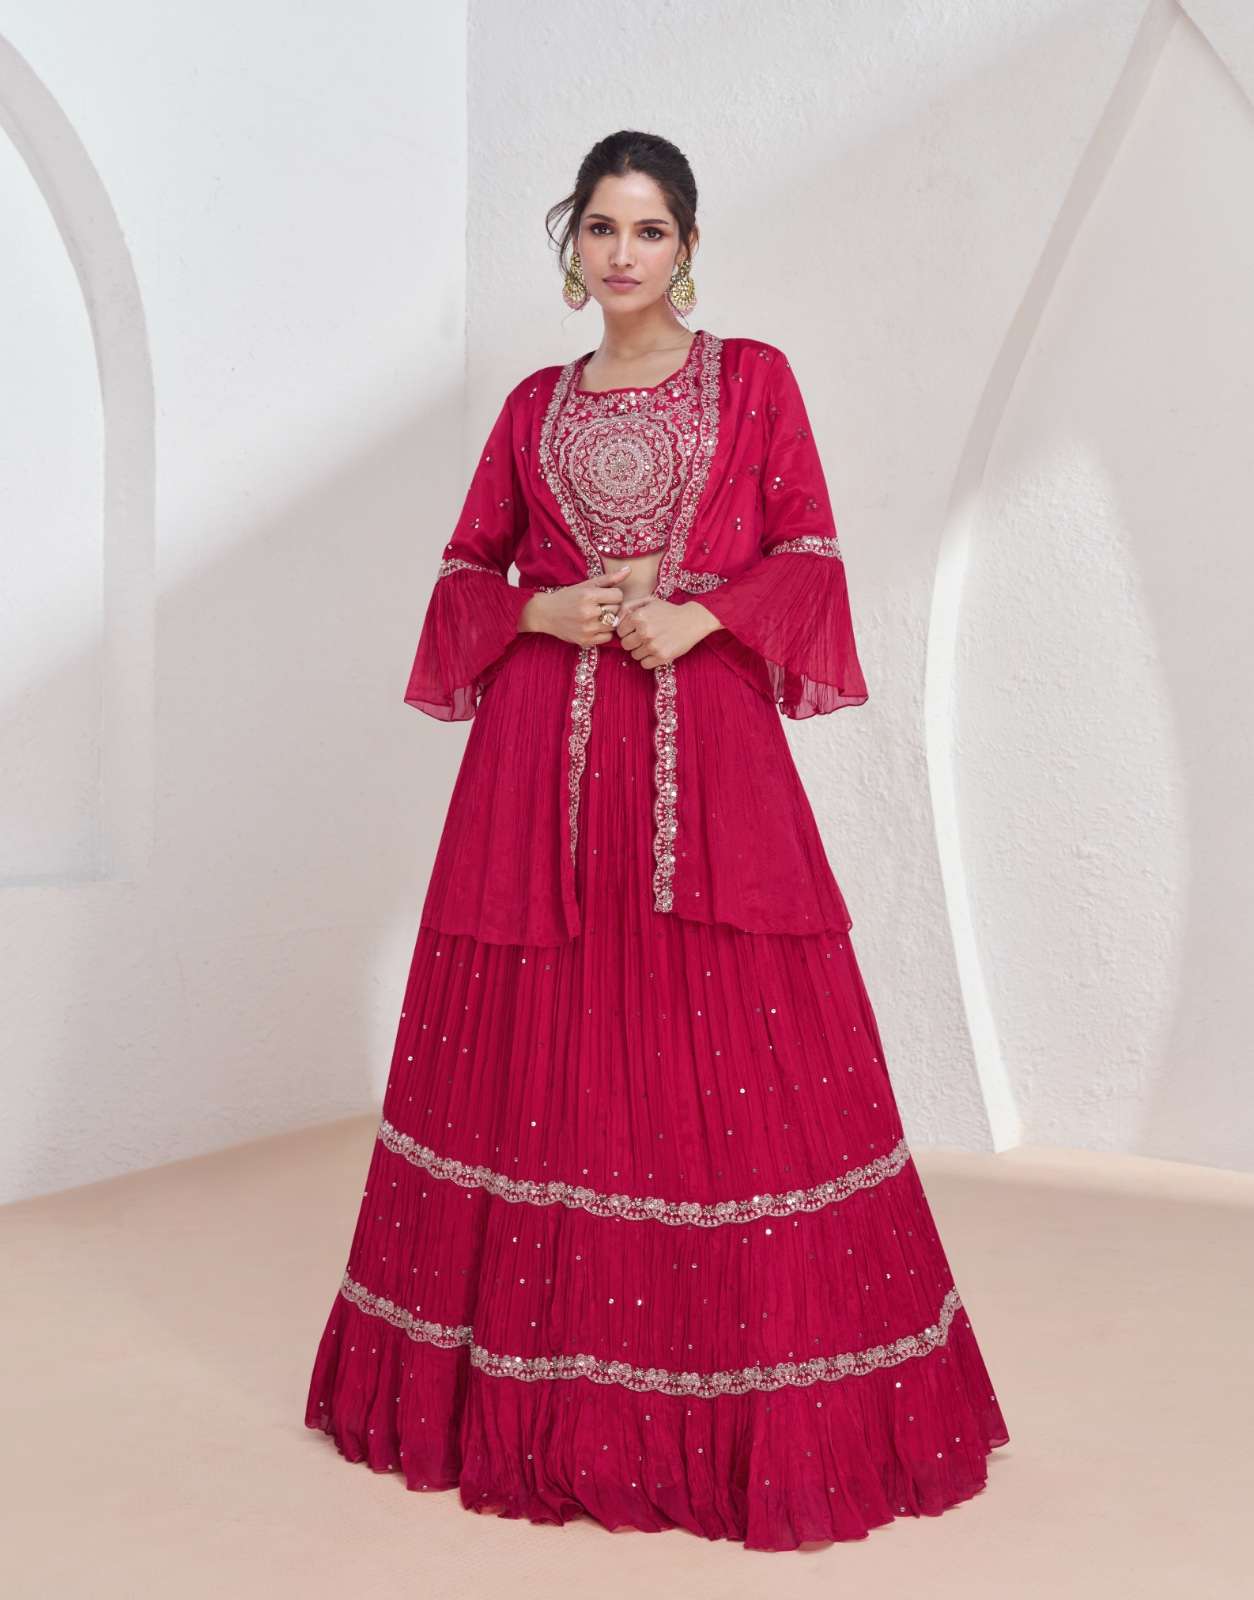 INDIAN BOLLYWOOD DESIGNER PARTY WEAR GEORGETTE RANI PINK KOTI SKIRT SALWAR SUIT CUM LEHENGA WITH THREAD SEQUENCE WORK SY AARZOO 9915